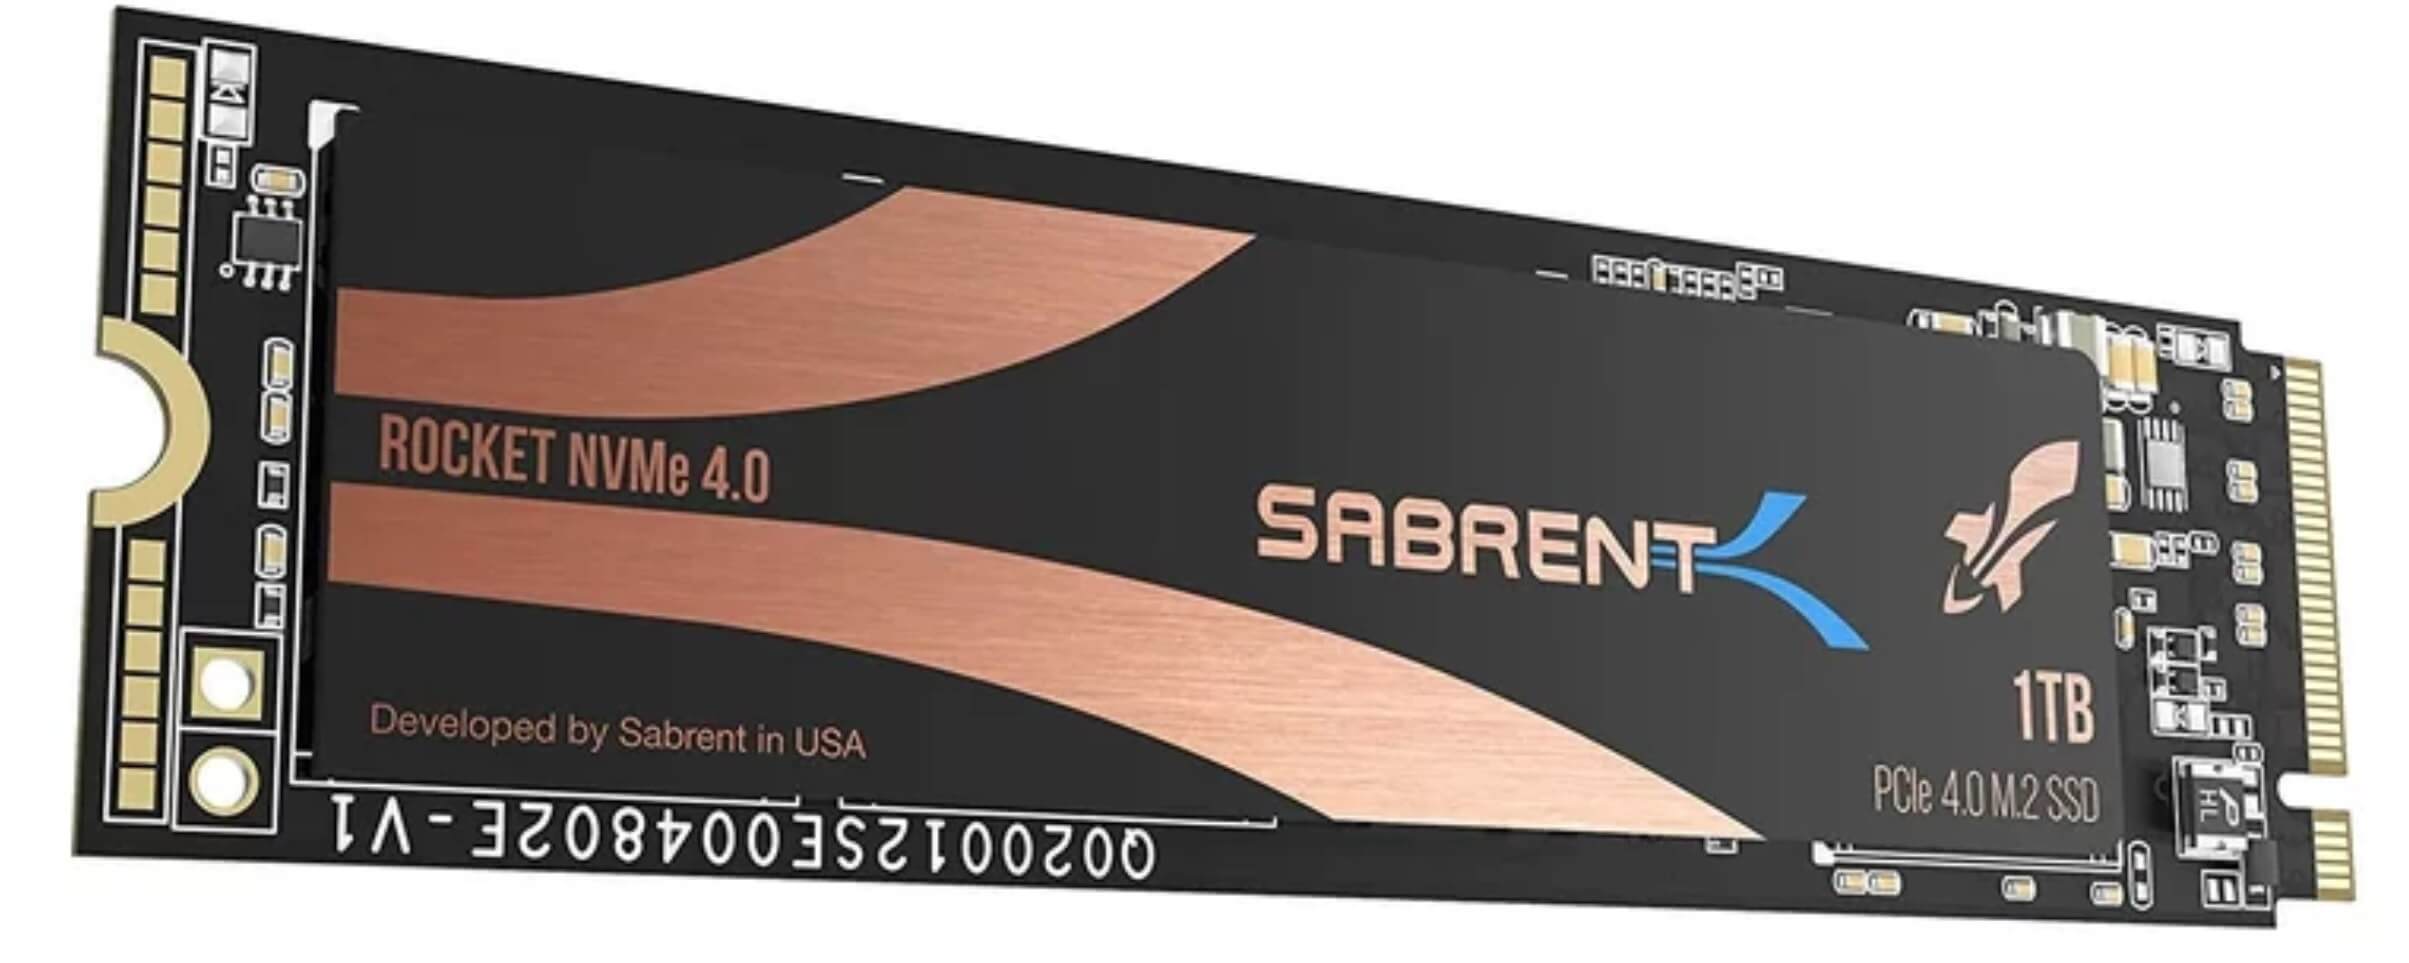 Sabrent's Rocket PCIe 4.0 SSD is now available to buy, offering 5GB/s speeds at $230